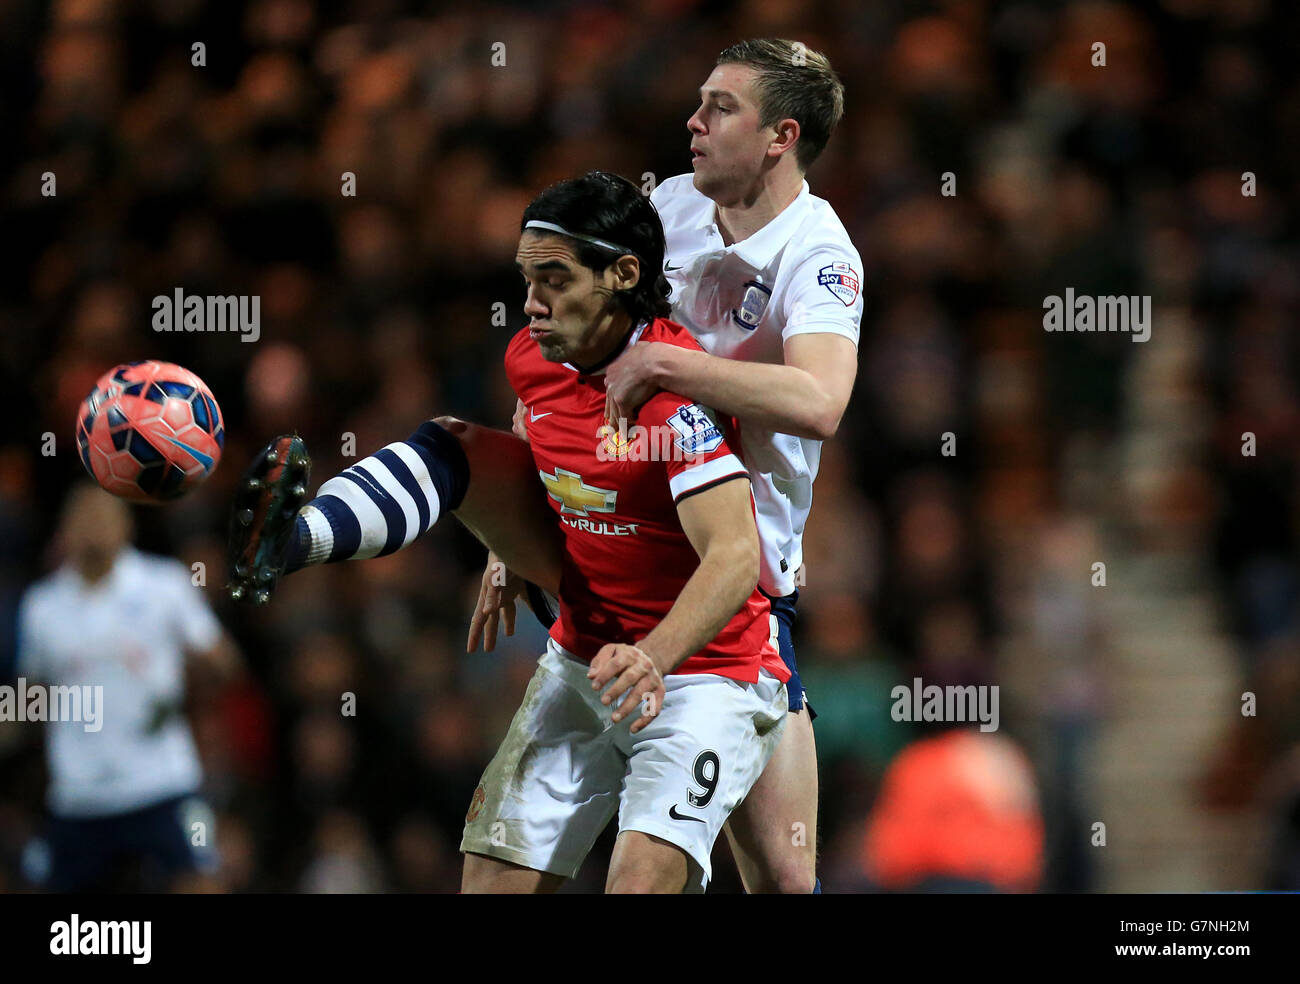 Manchester United's Radamel Falcao (left) and Preston North End's Paul Huntington (right) battle for the ball. Stock Photo